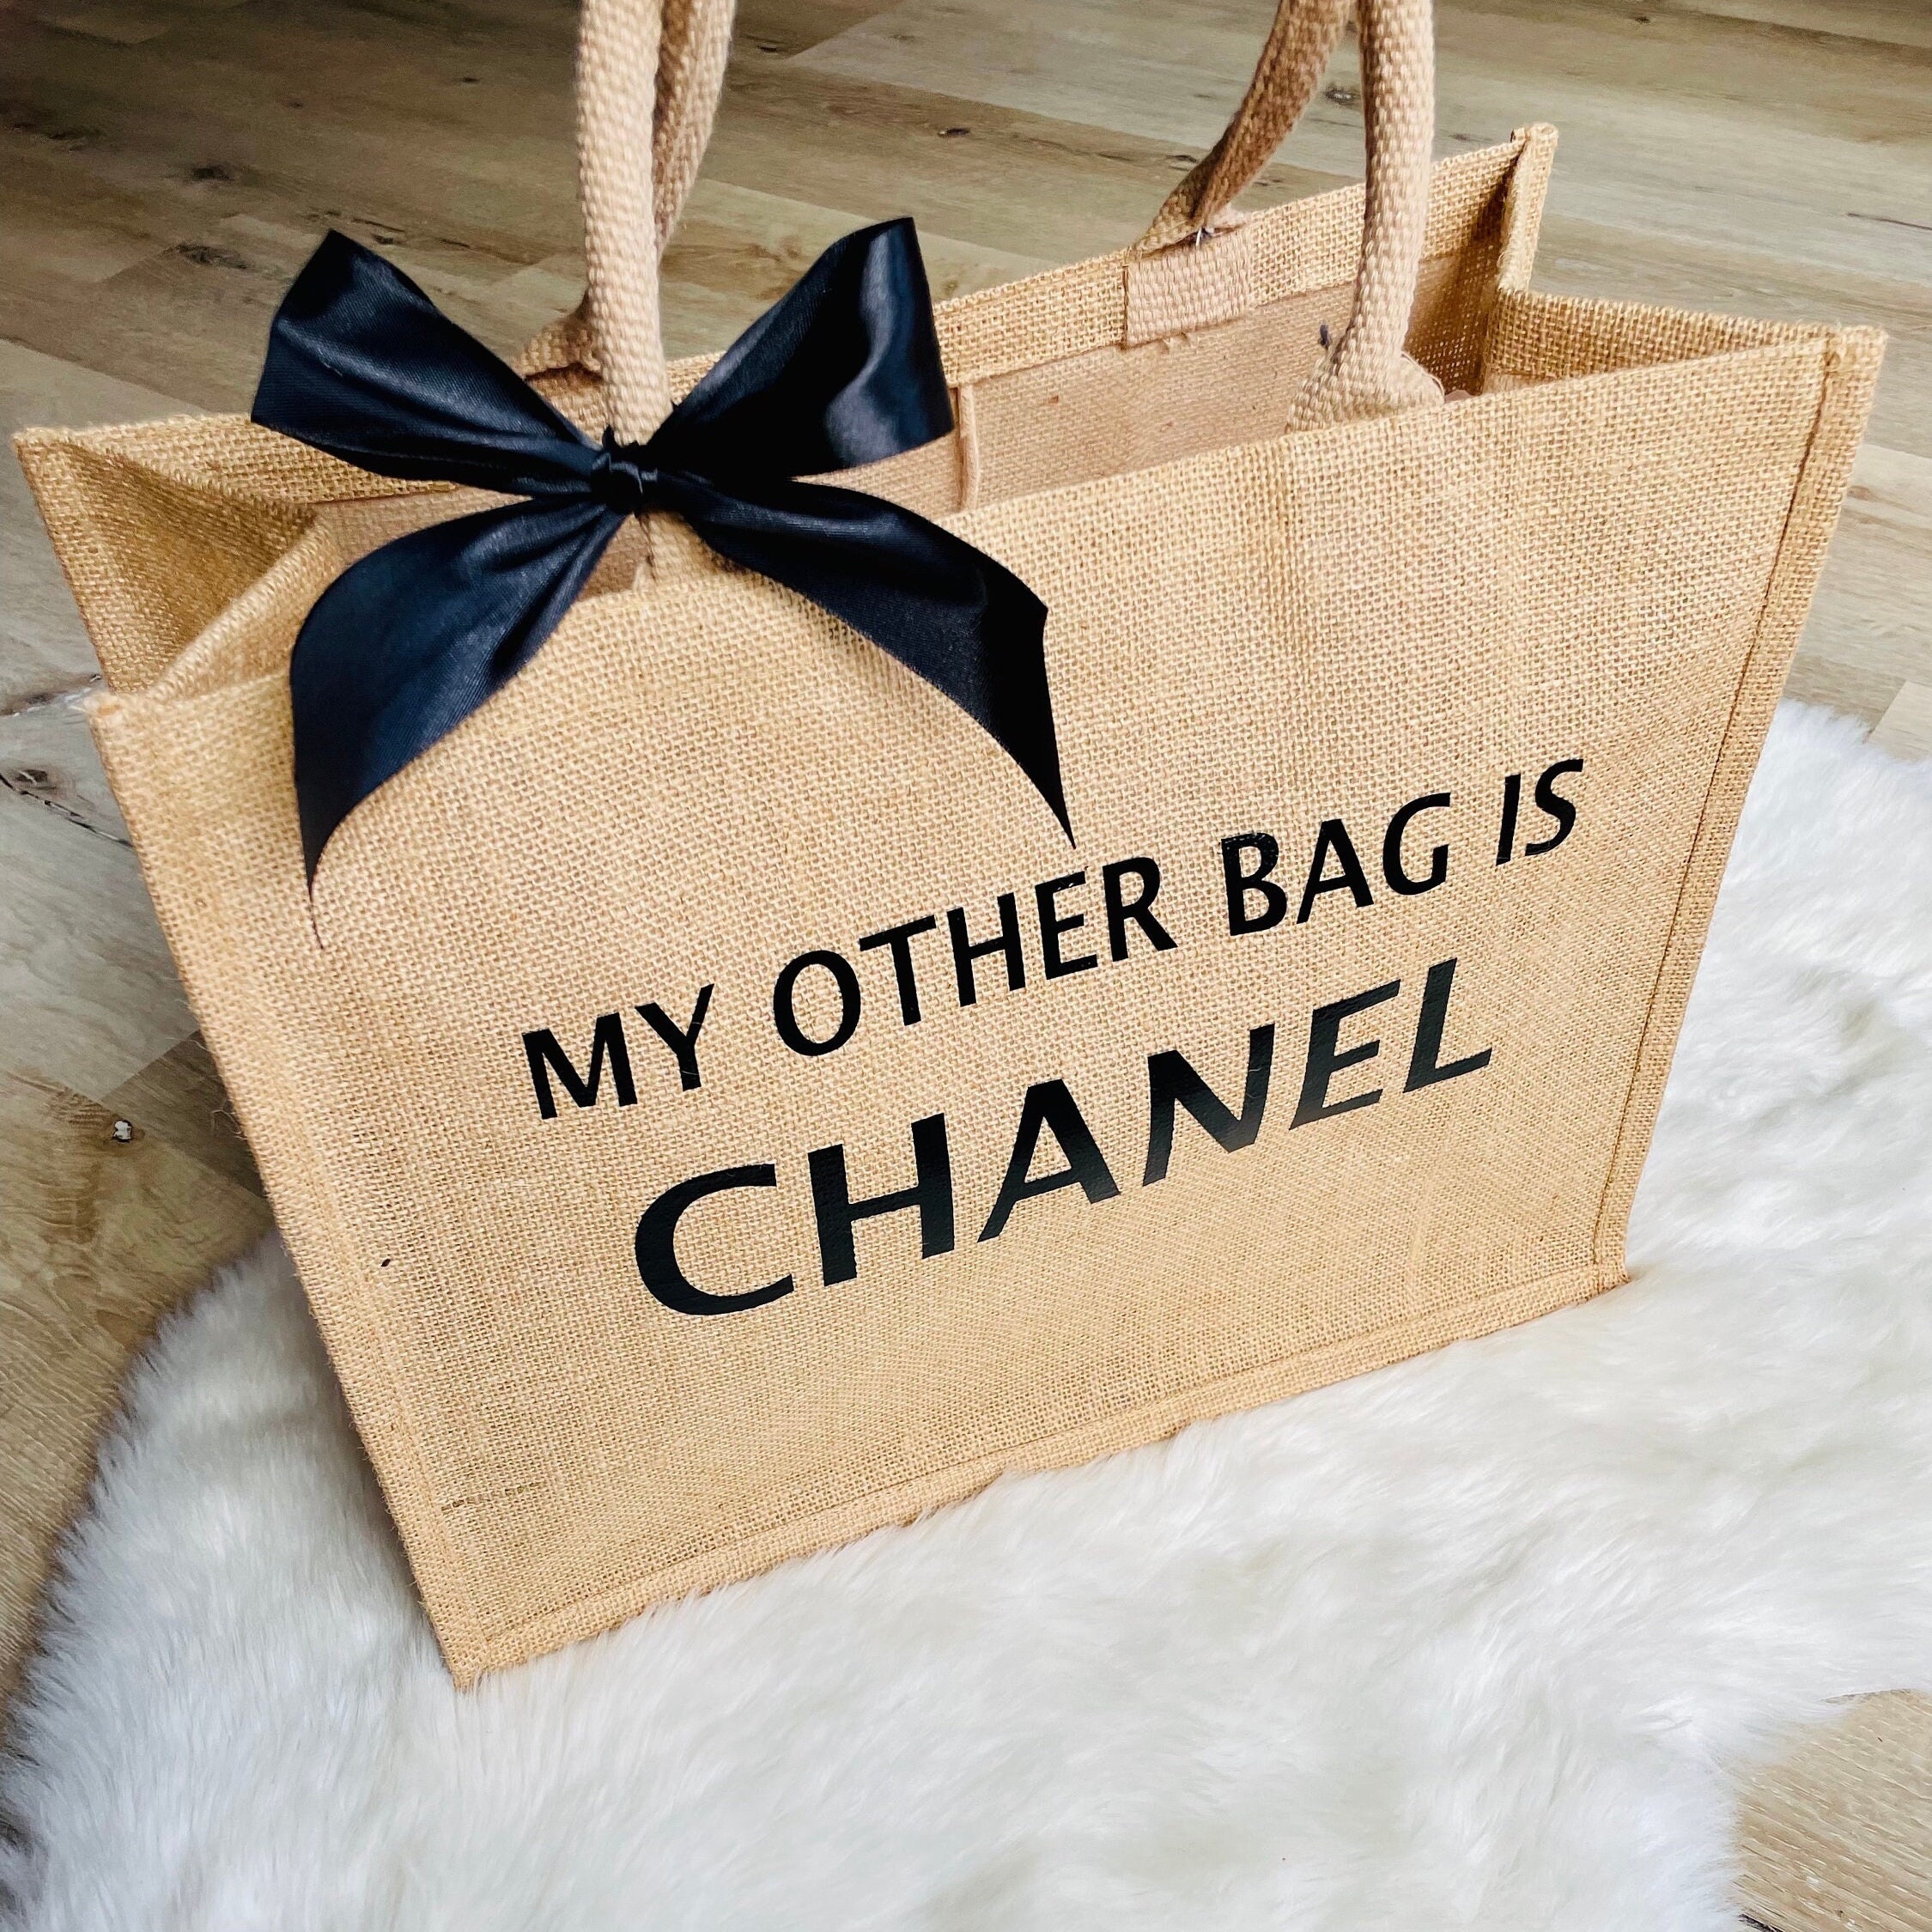 my other bag is chanel｜TikTok Search